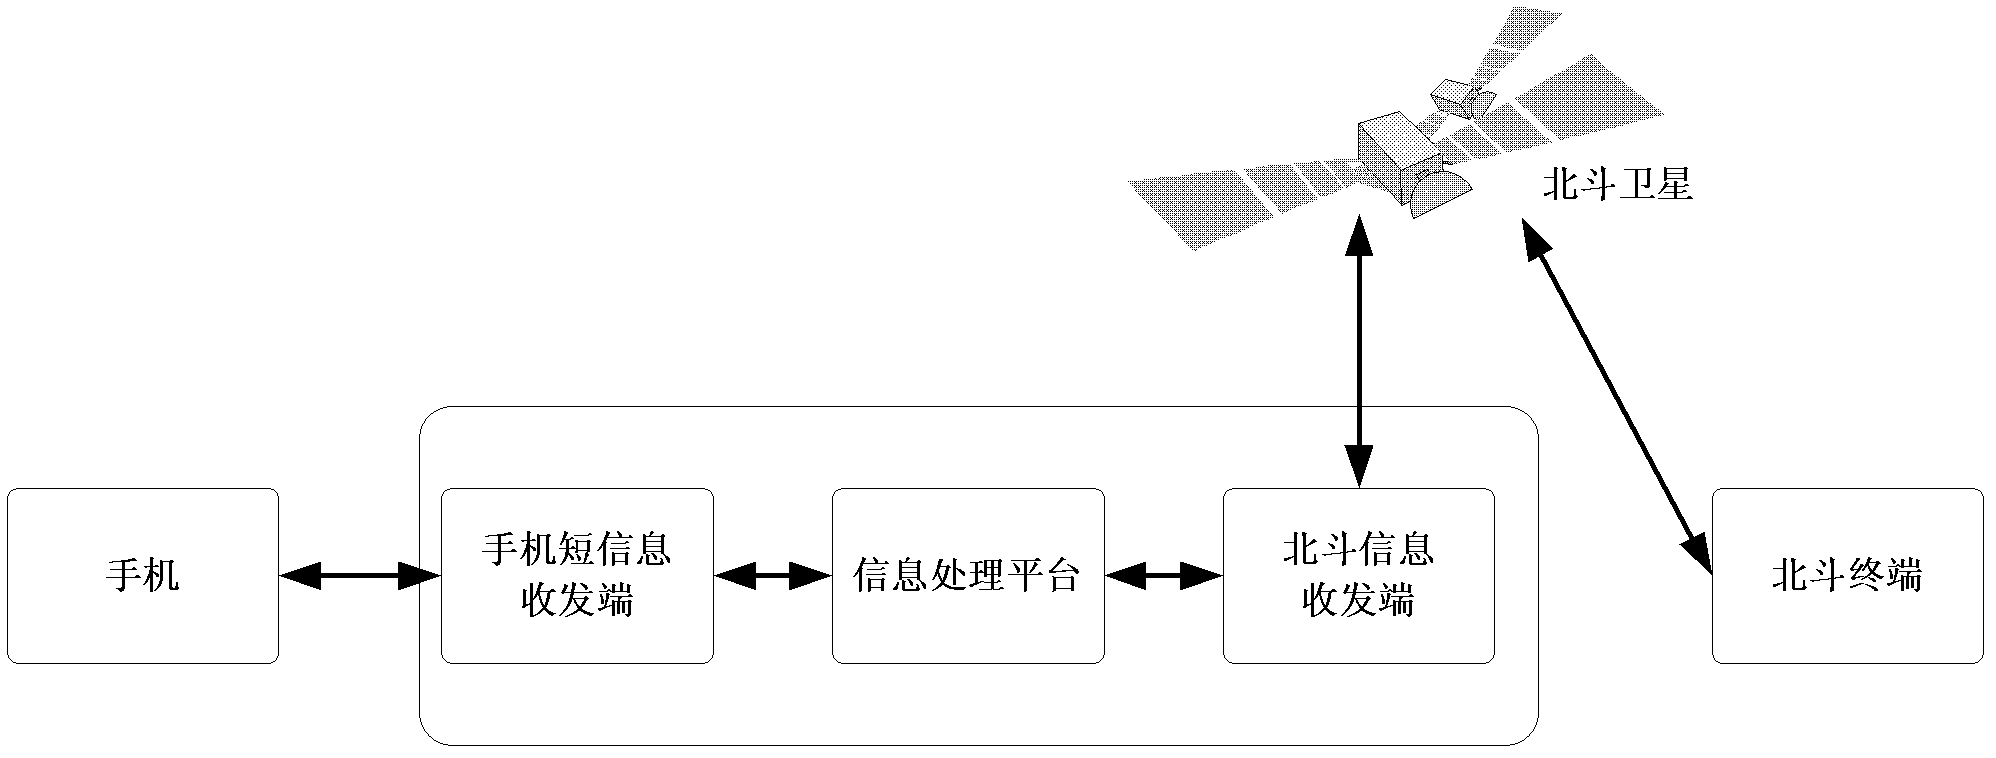 System and method for realizing two-way short message communication between Beidou terminal and mobile phone